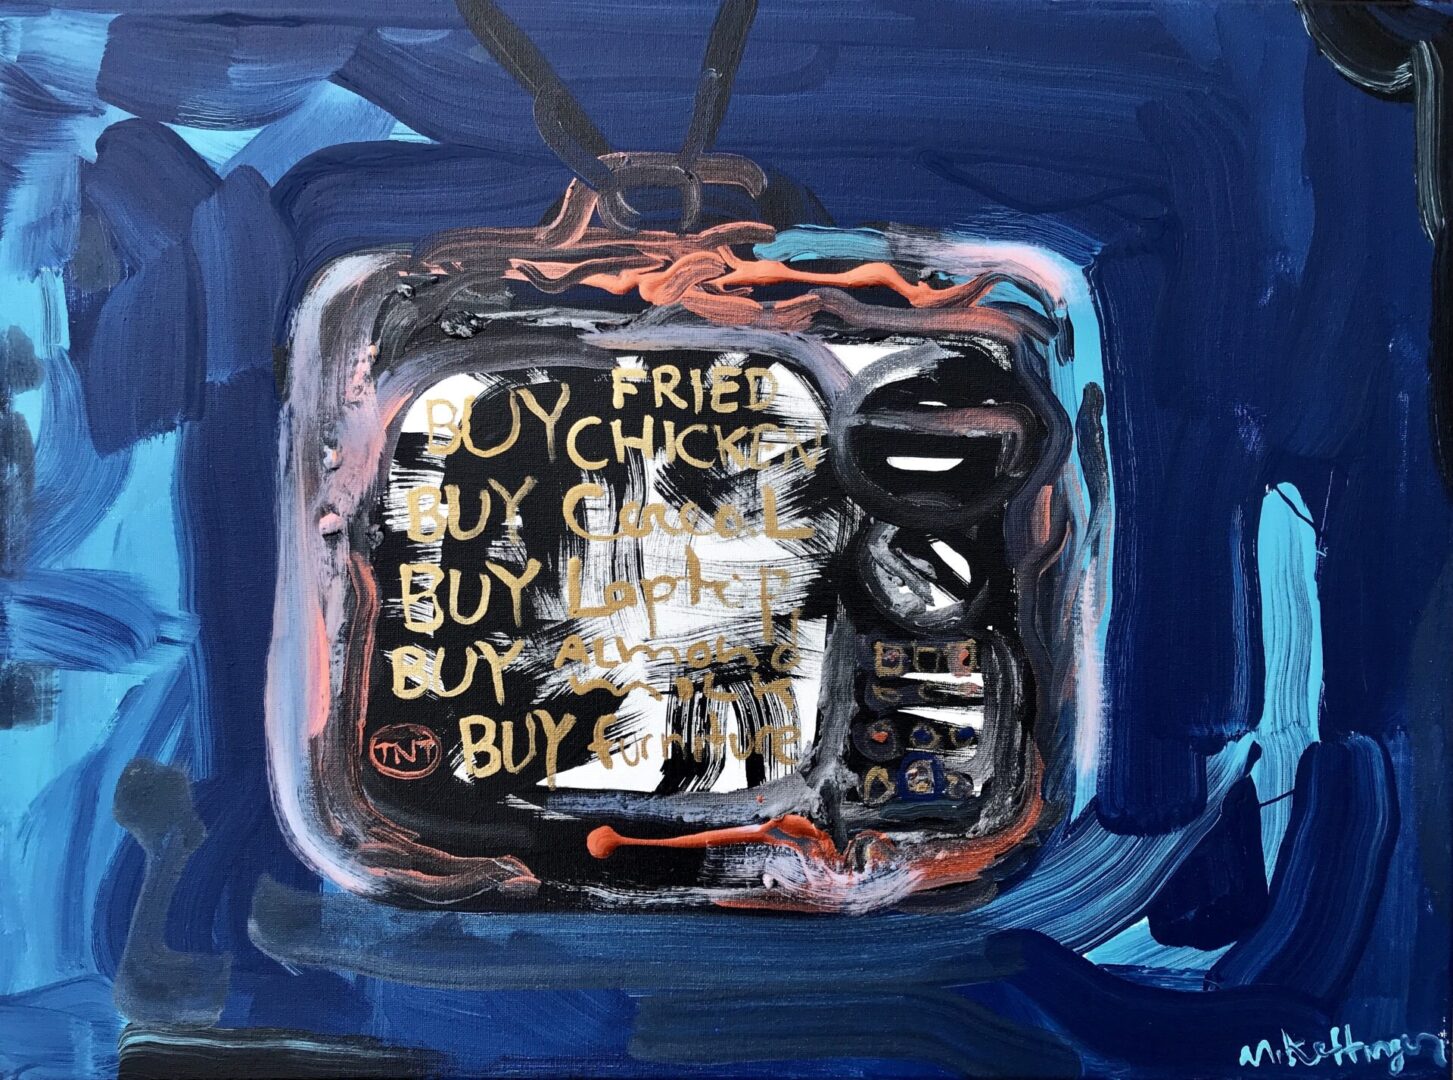 Oil painting of a television and something written under it